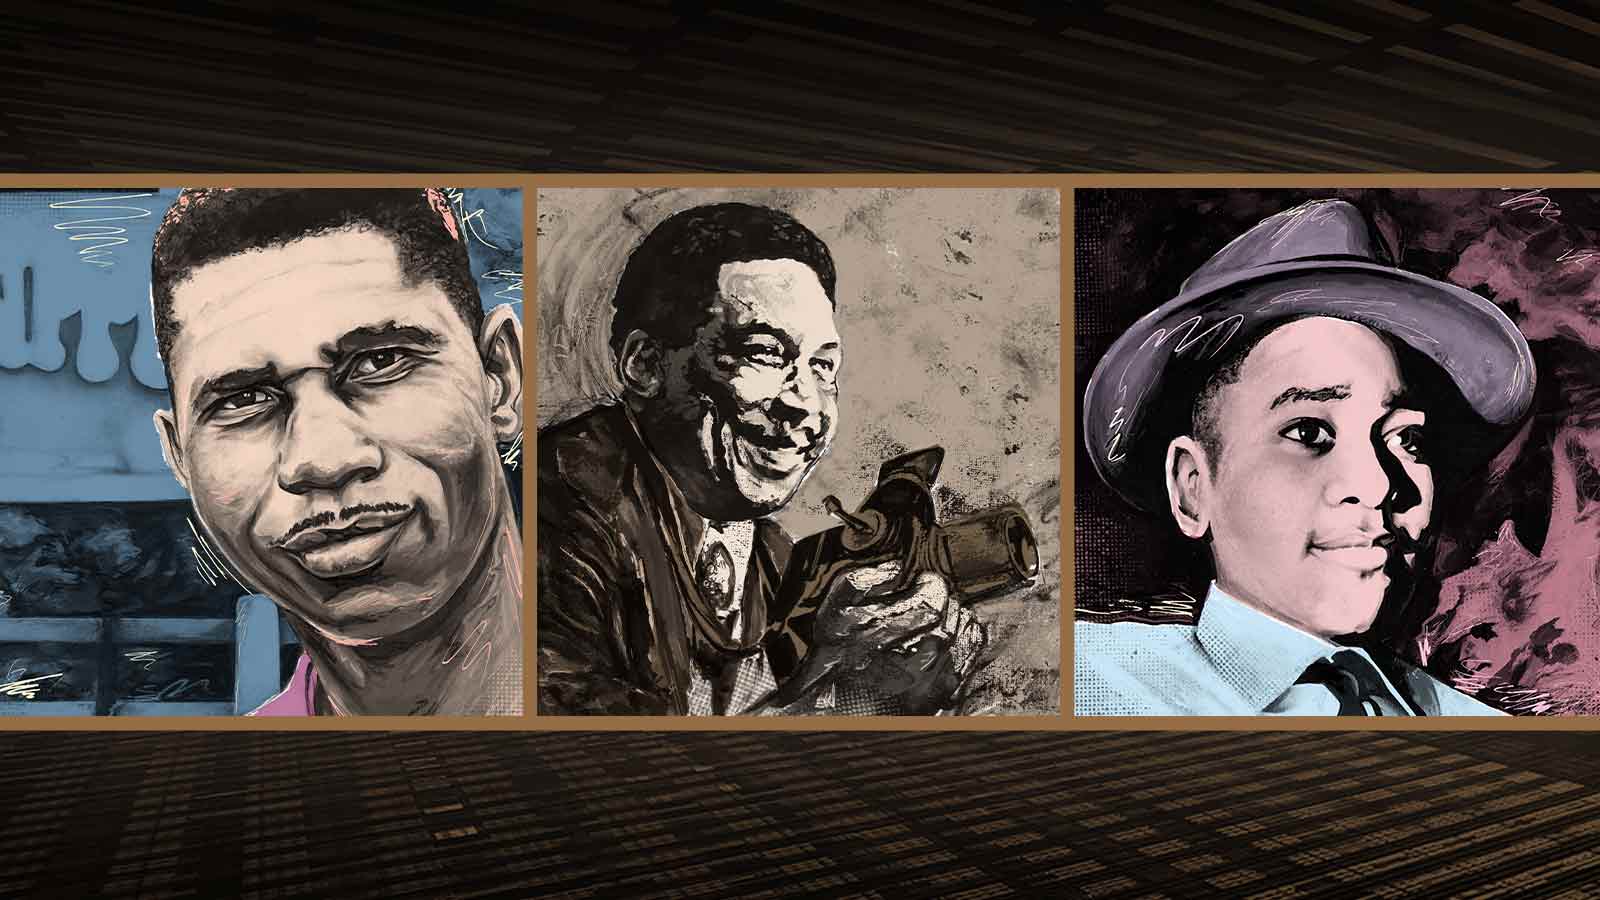 An image of Ernest Withers, Emmett Till, and Medgar Evers celebrates Black History Month and the civil rights organizations leaning into the metaverse.